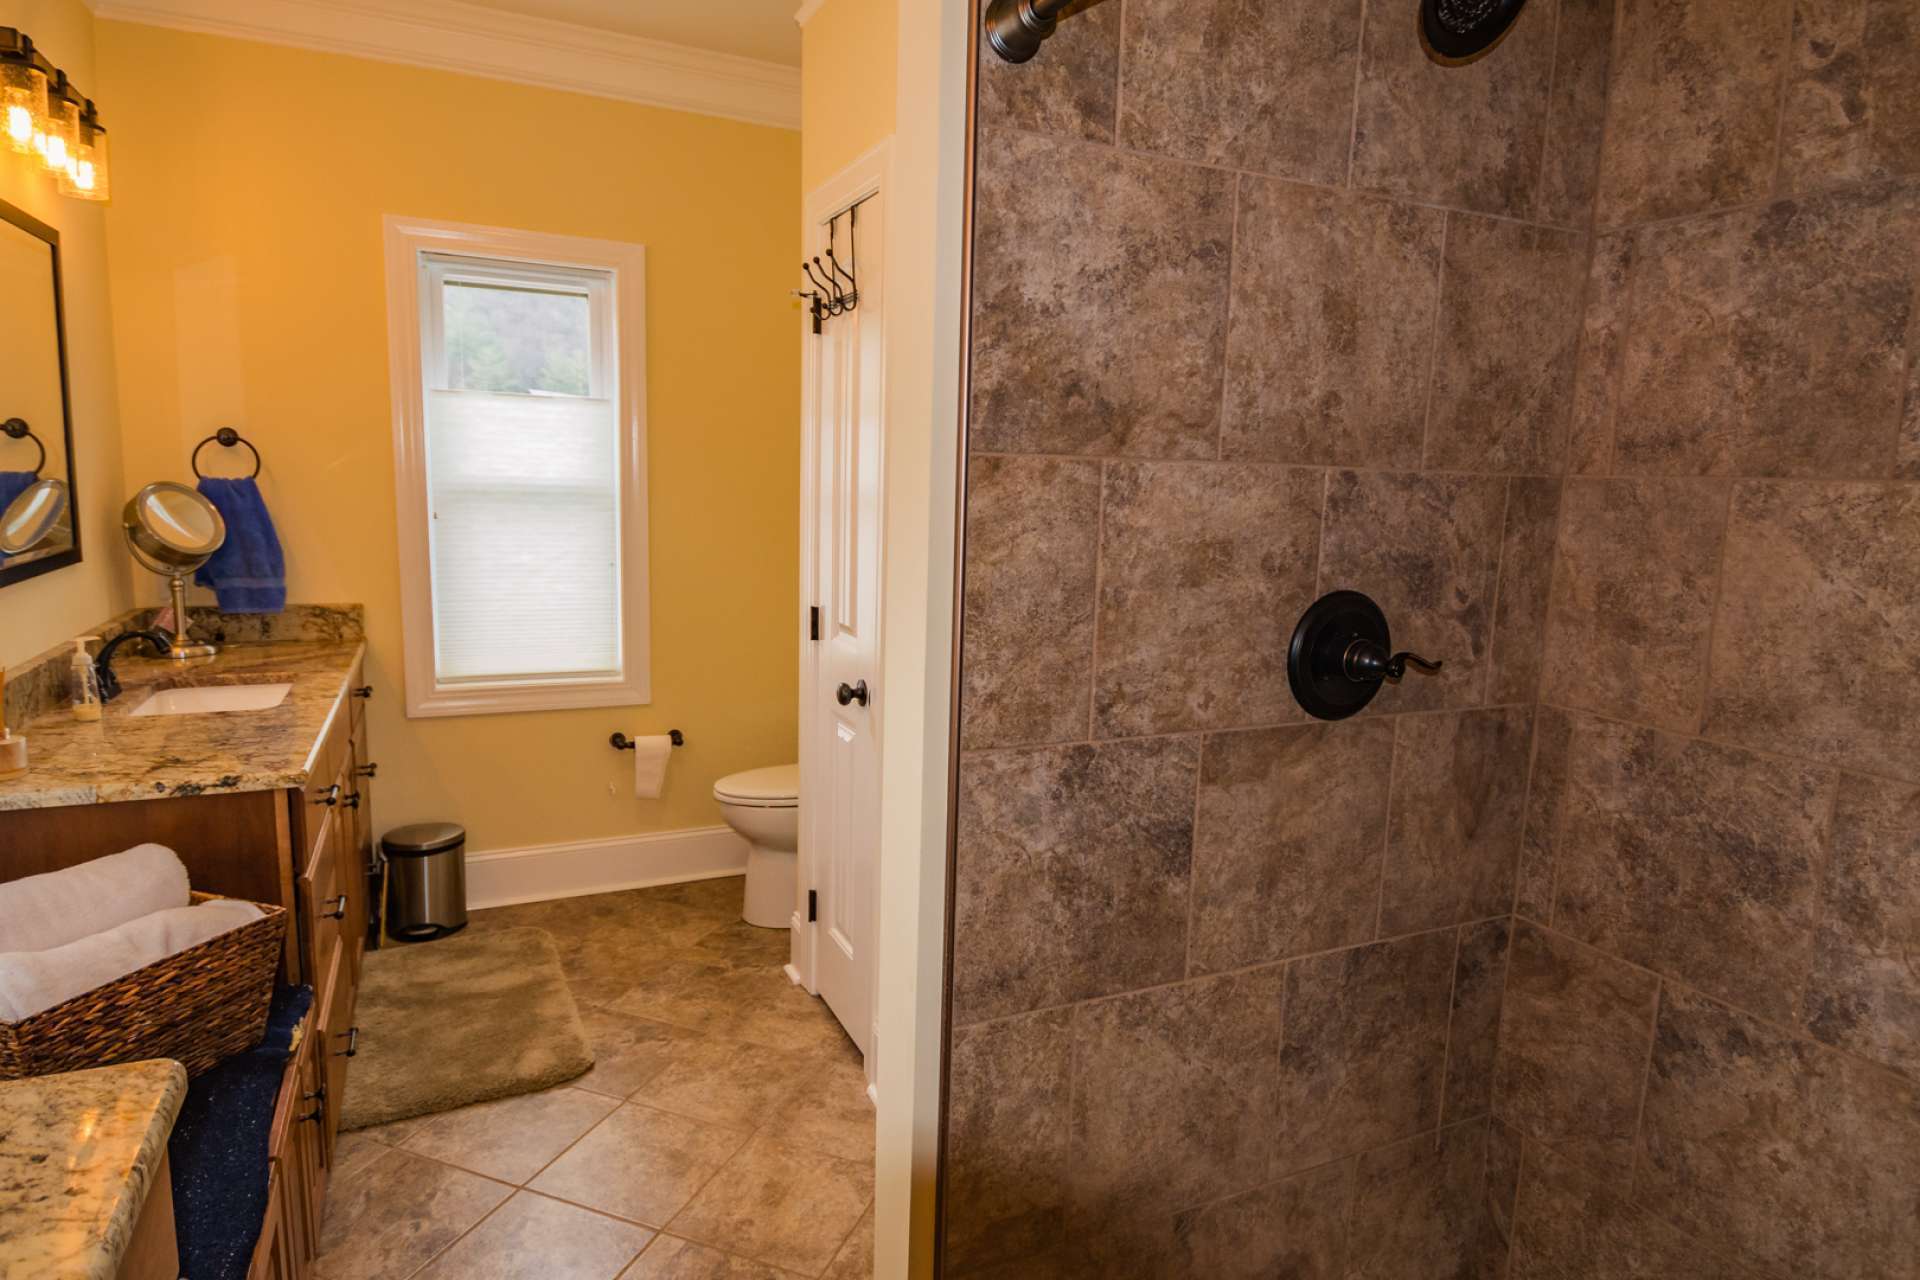 A half bath and laundry room complete the main level.